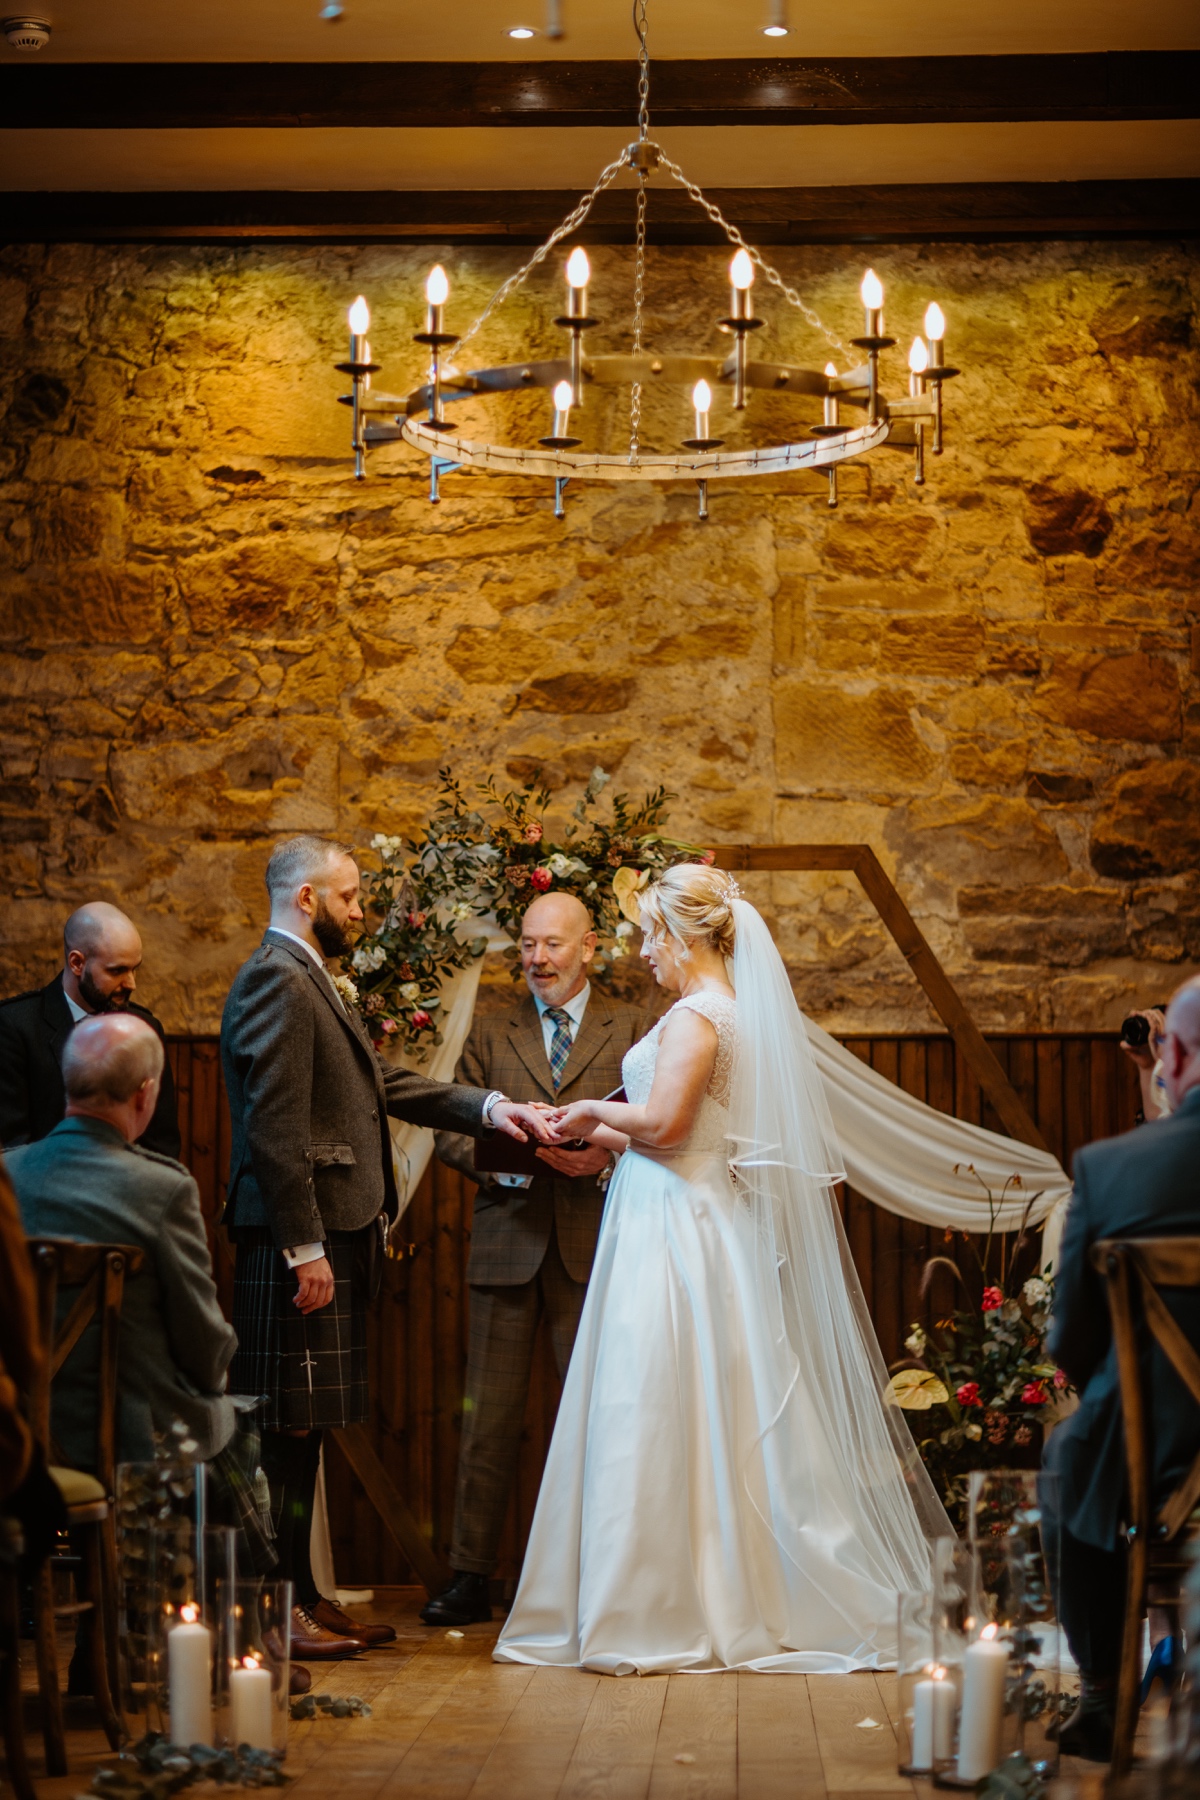 bride wearing white dress placing the ring on grooms finger with floral arch and stone wall in background scottish humanist wedding